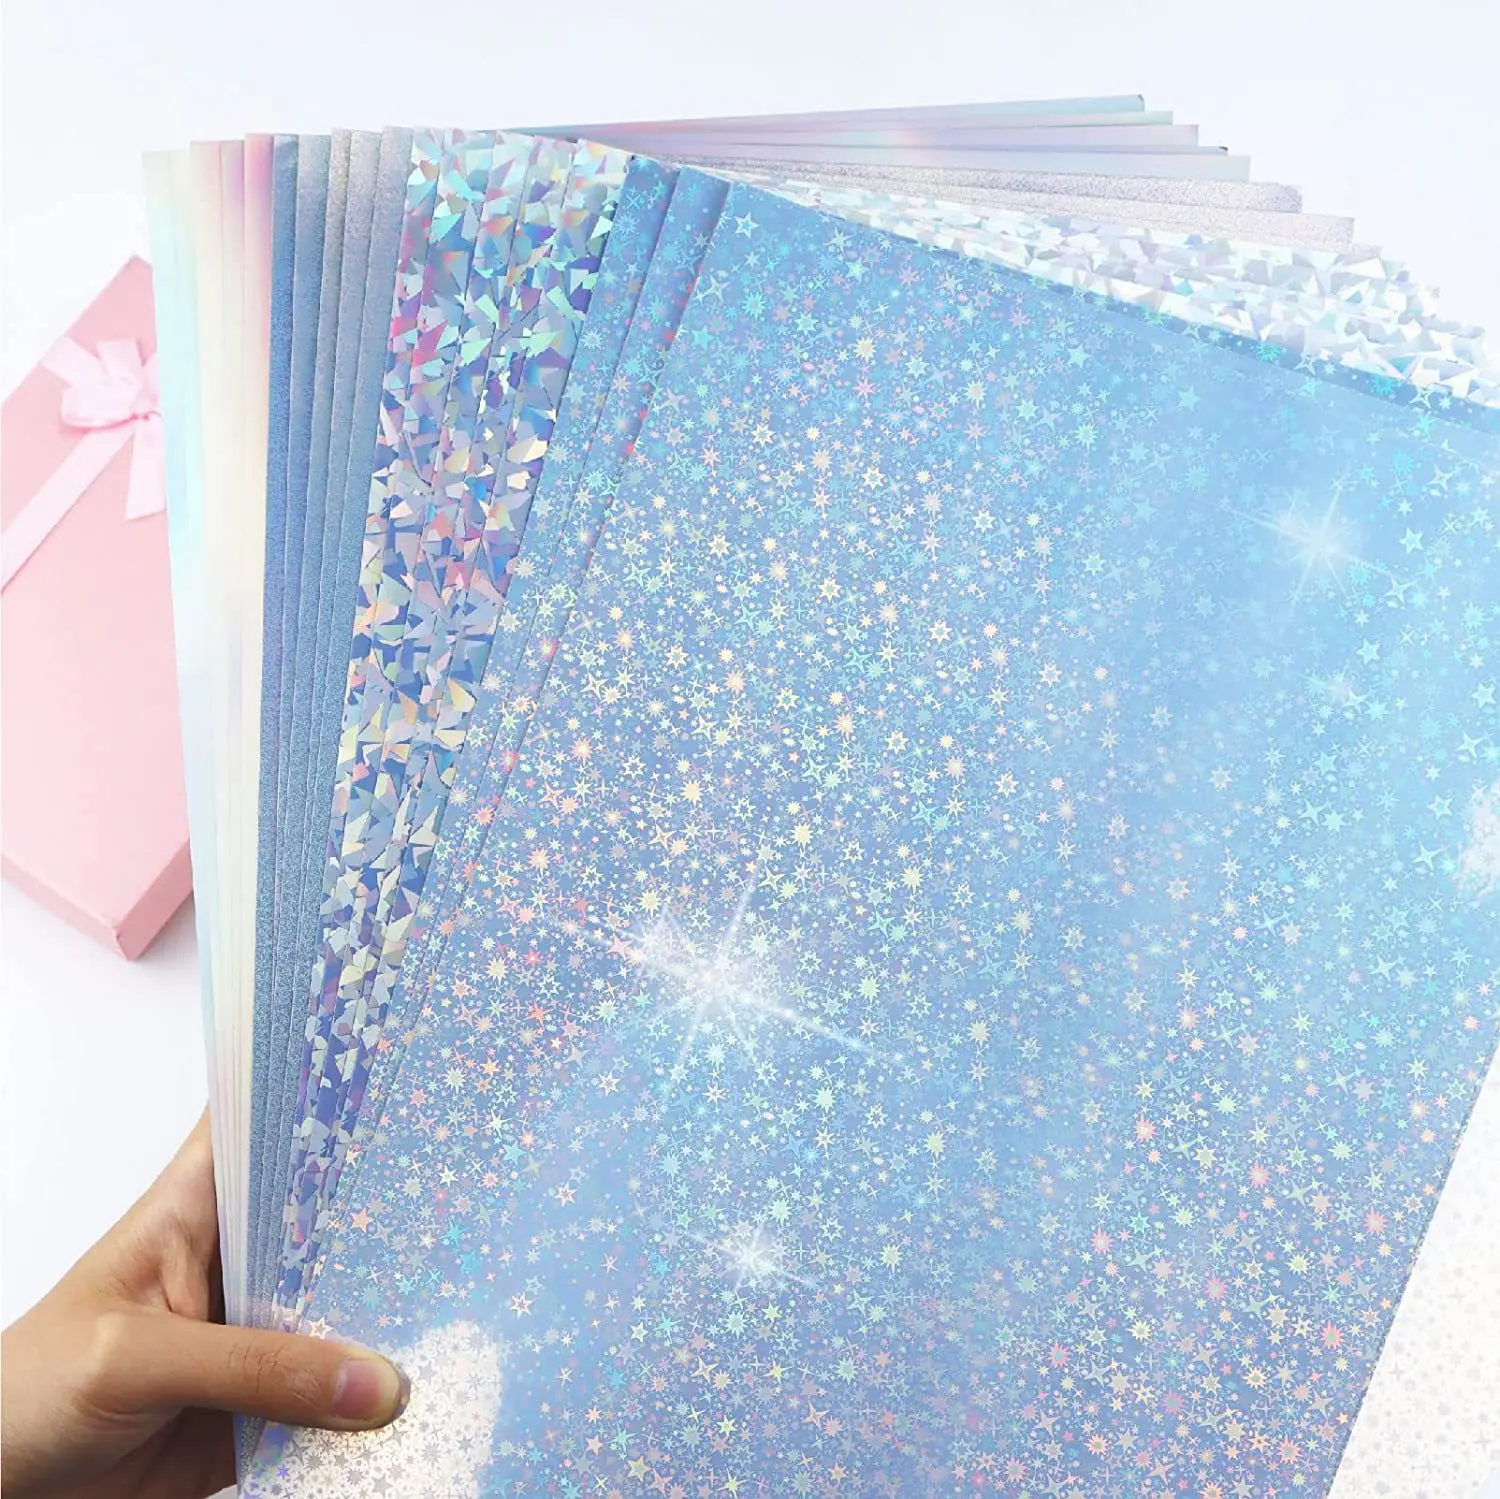 10 Sheets A4 Holographic Laser Print Paper Waterproof Vinyl Print Stickers DIY Self-adhesive Paper for Laser Inkjet Printing